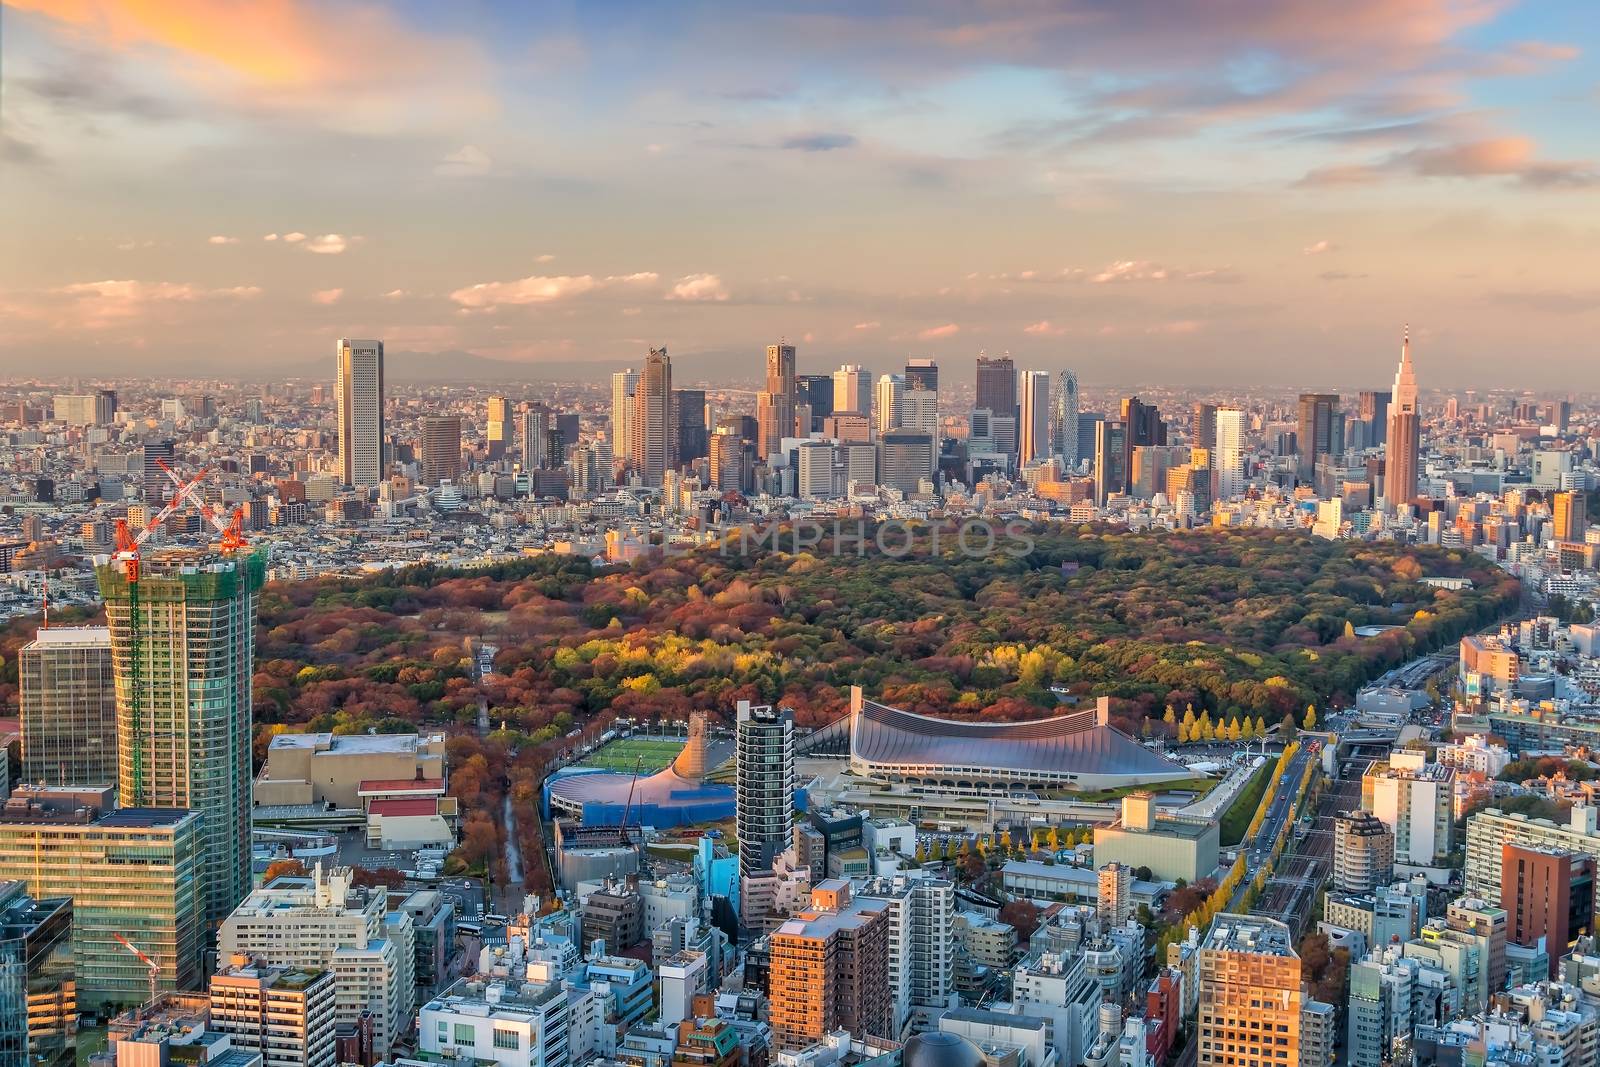 Top view of Tokyo city skyline in Japan.
Top view of Tokyo skyli by f11photo